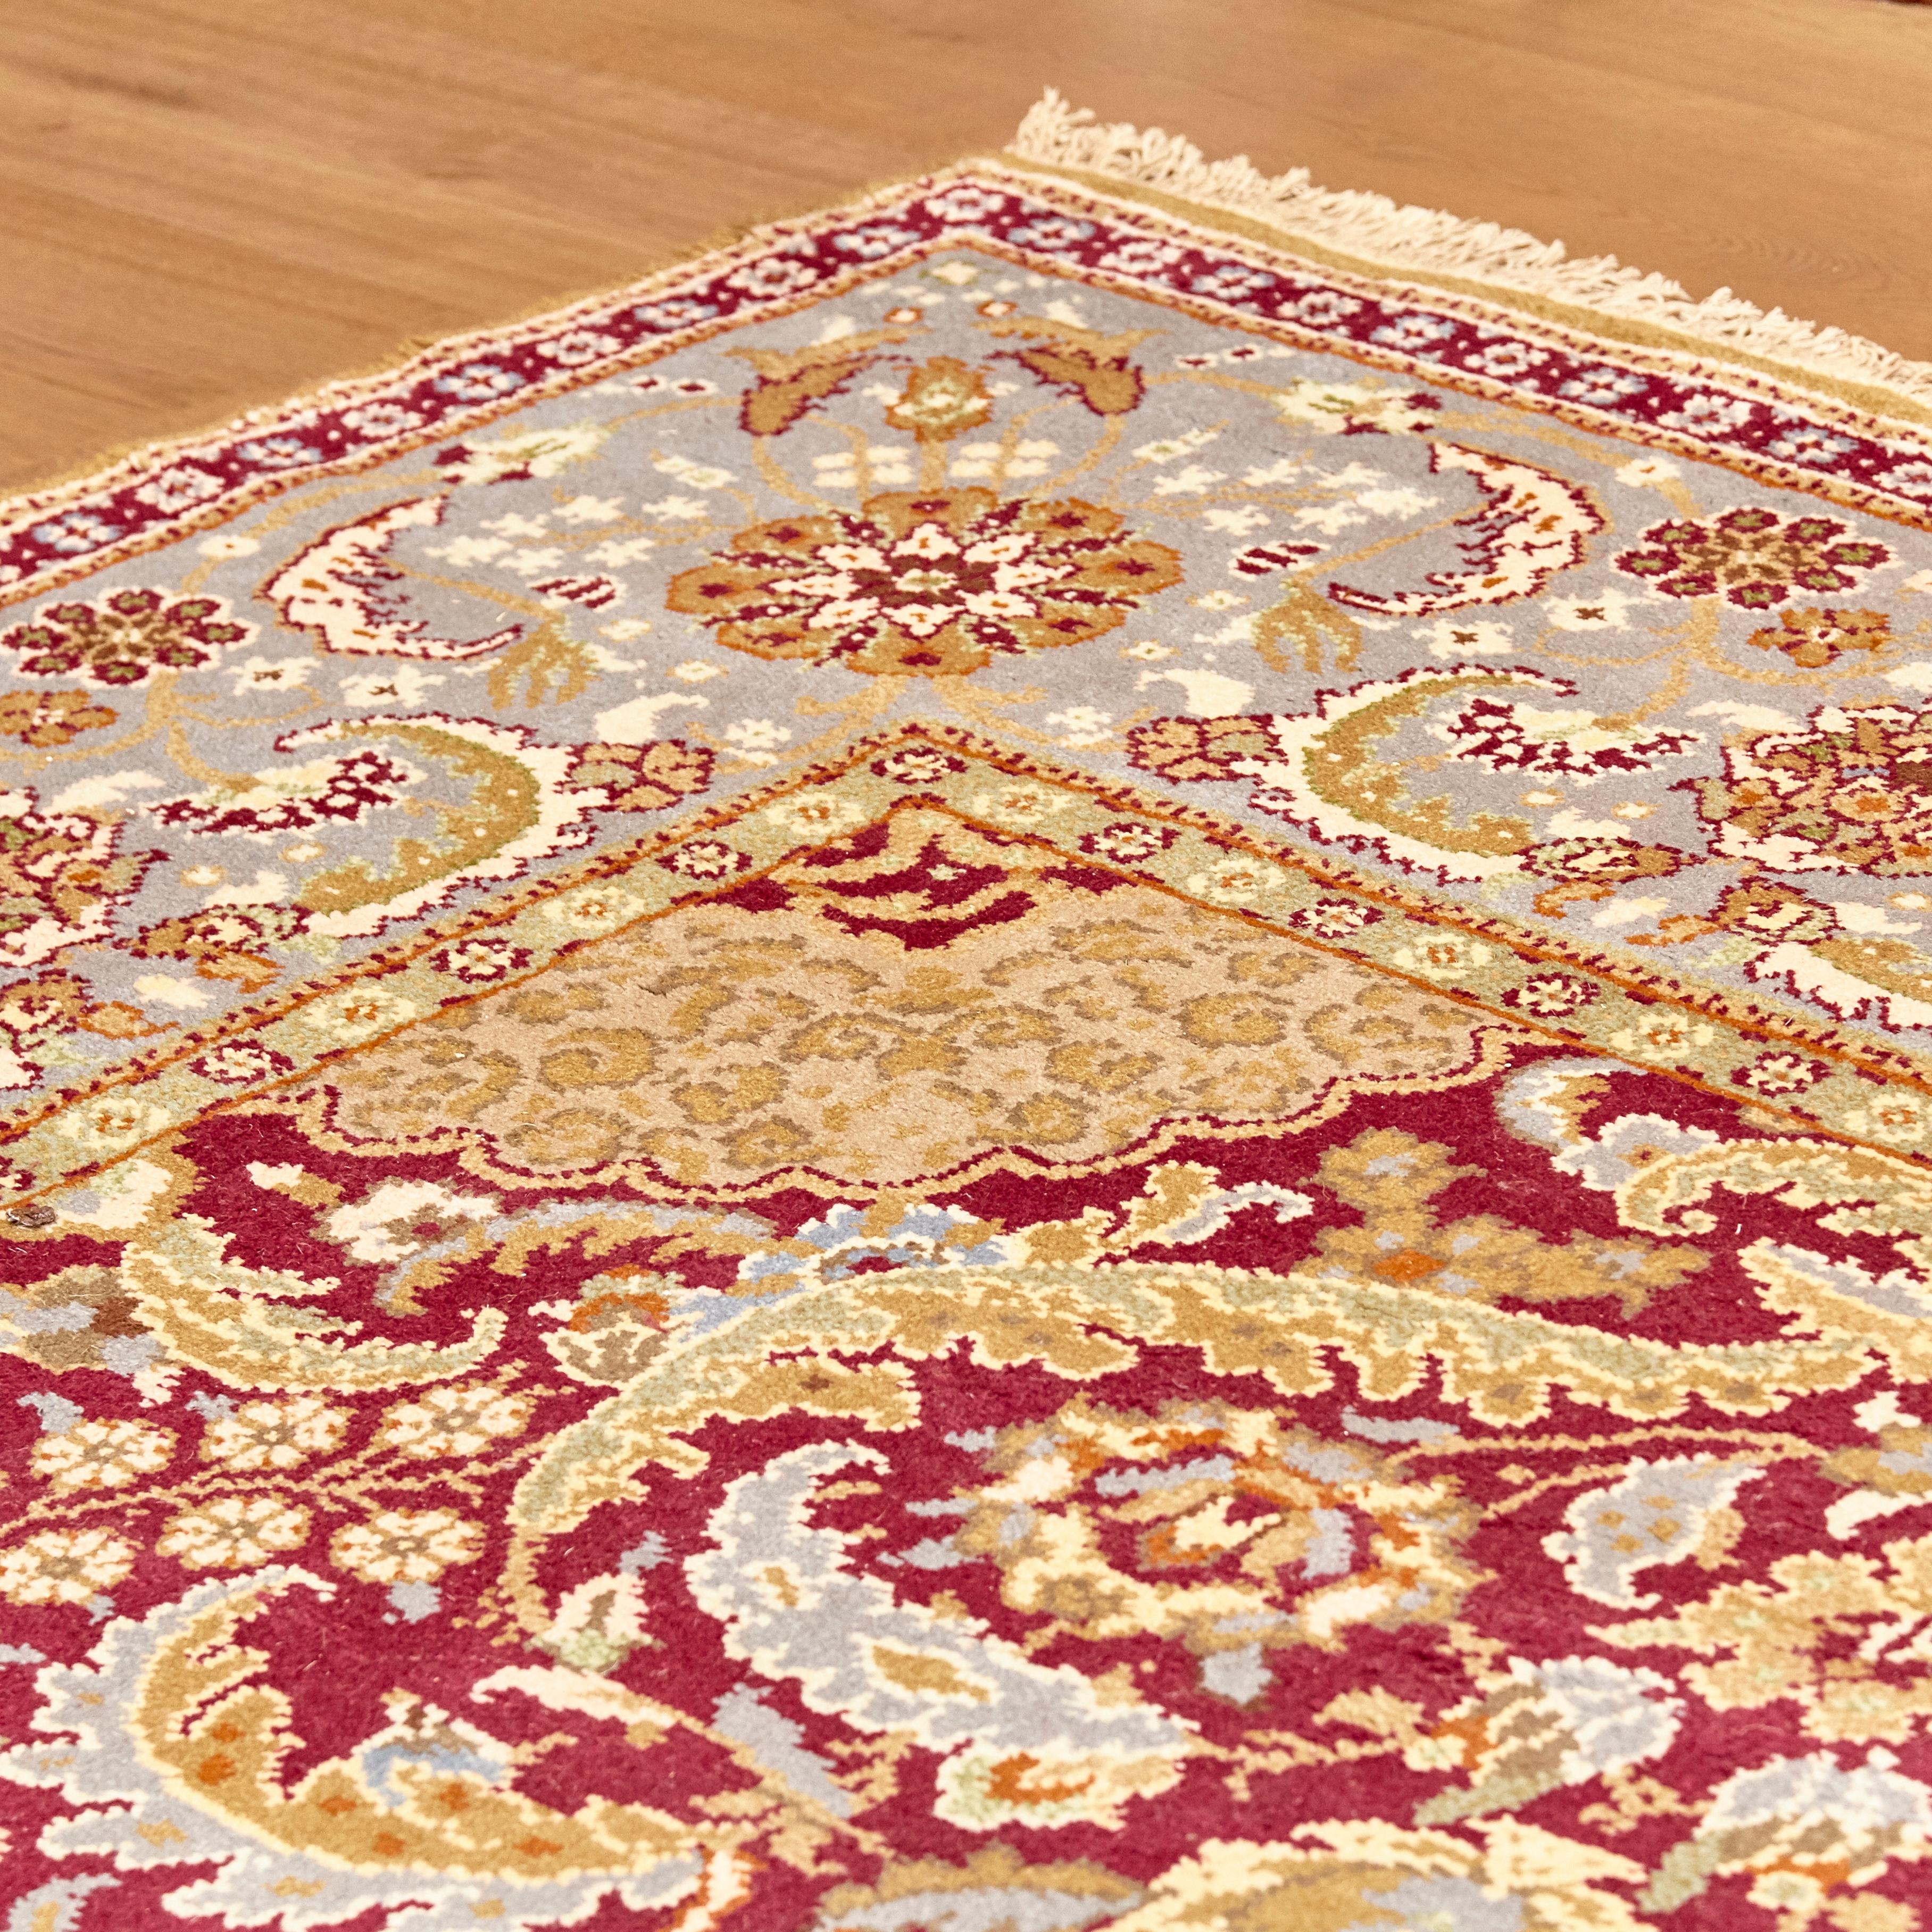 Hand knotted Oriental wool rug,
circa 1950.
Wool
Measures: 300 x 400 cm.